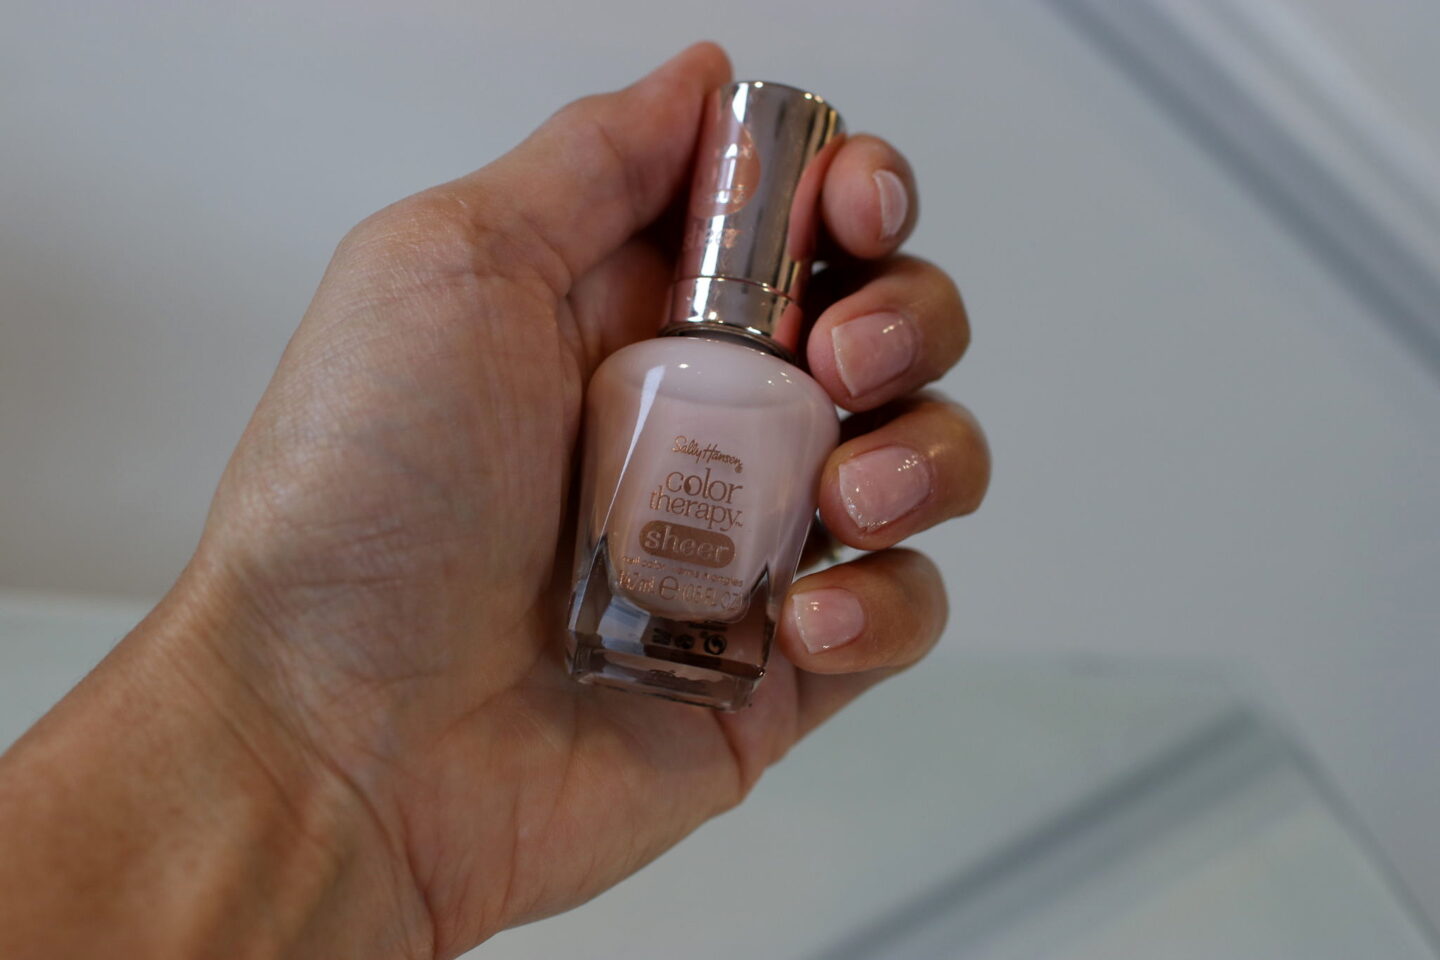 Sally Hansen's newest care essentials and nail color.